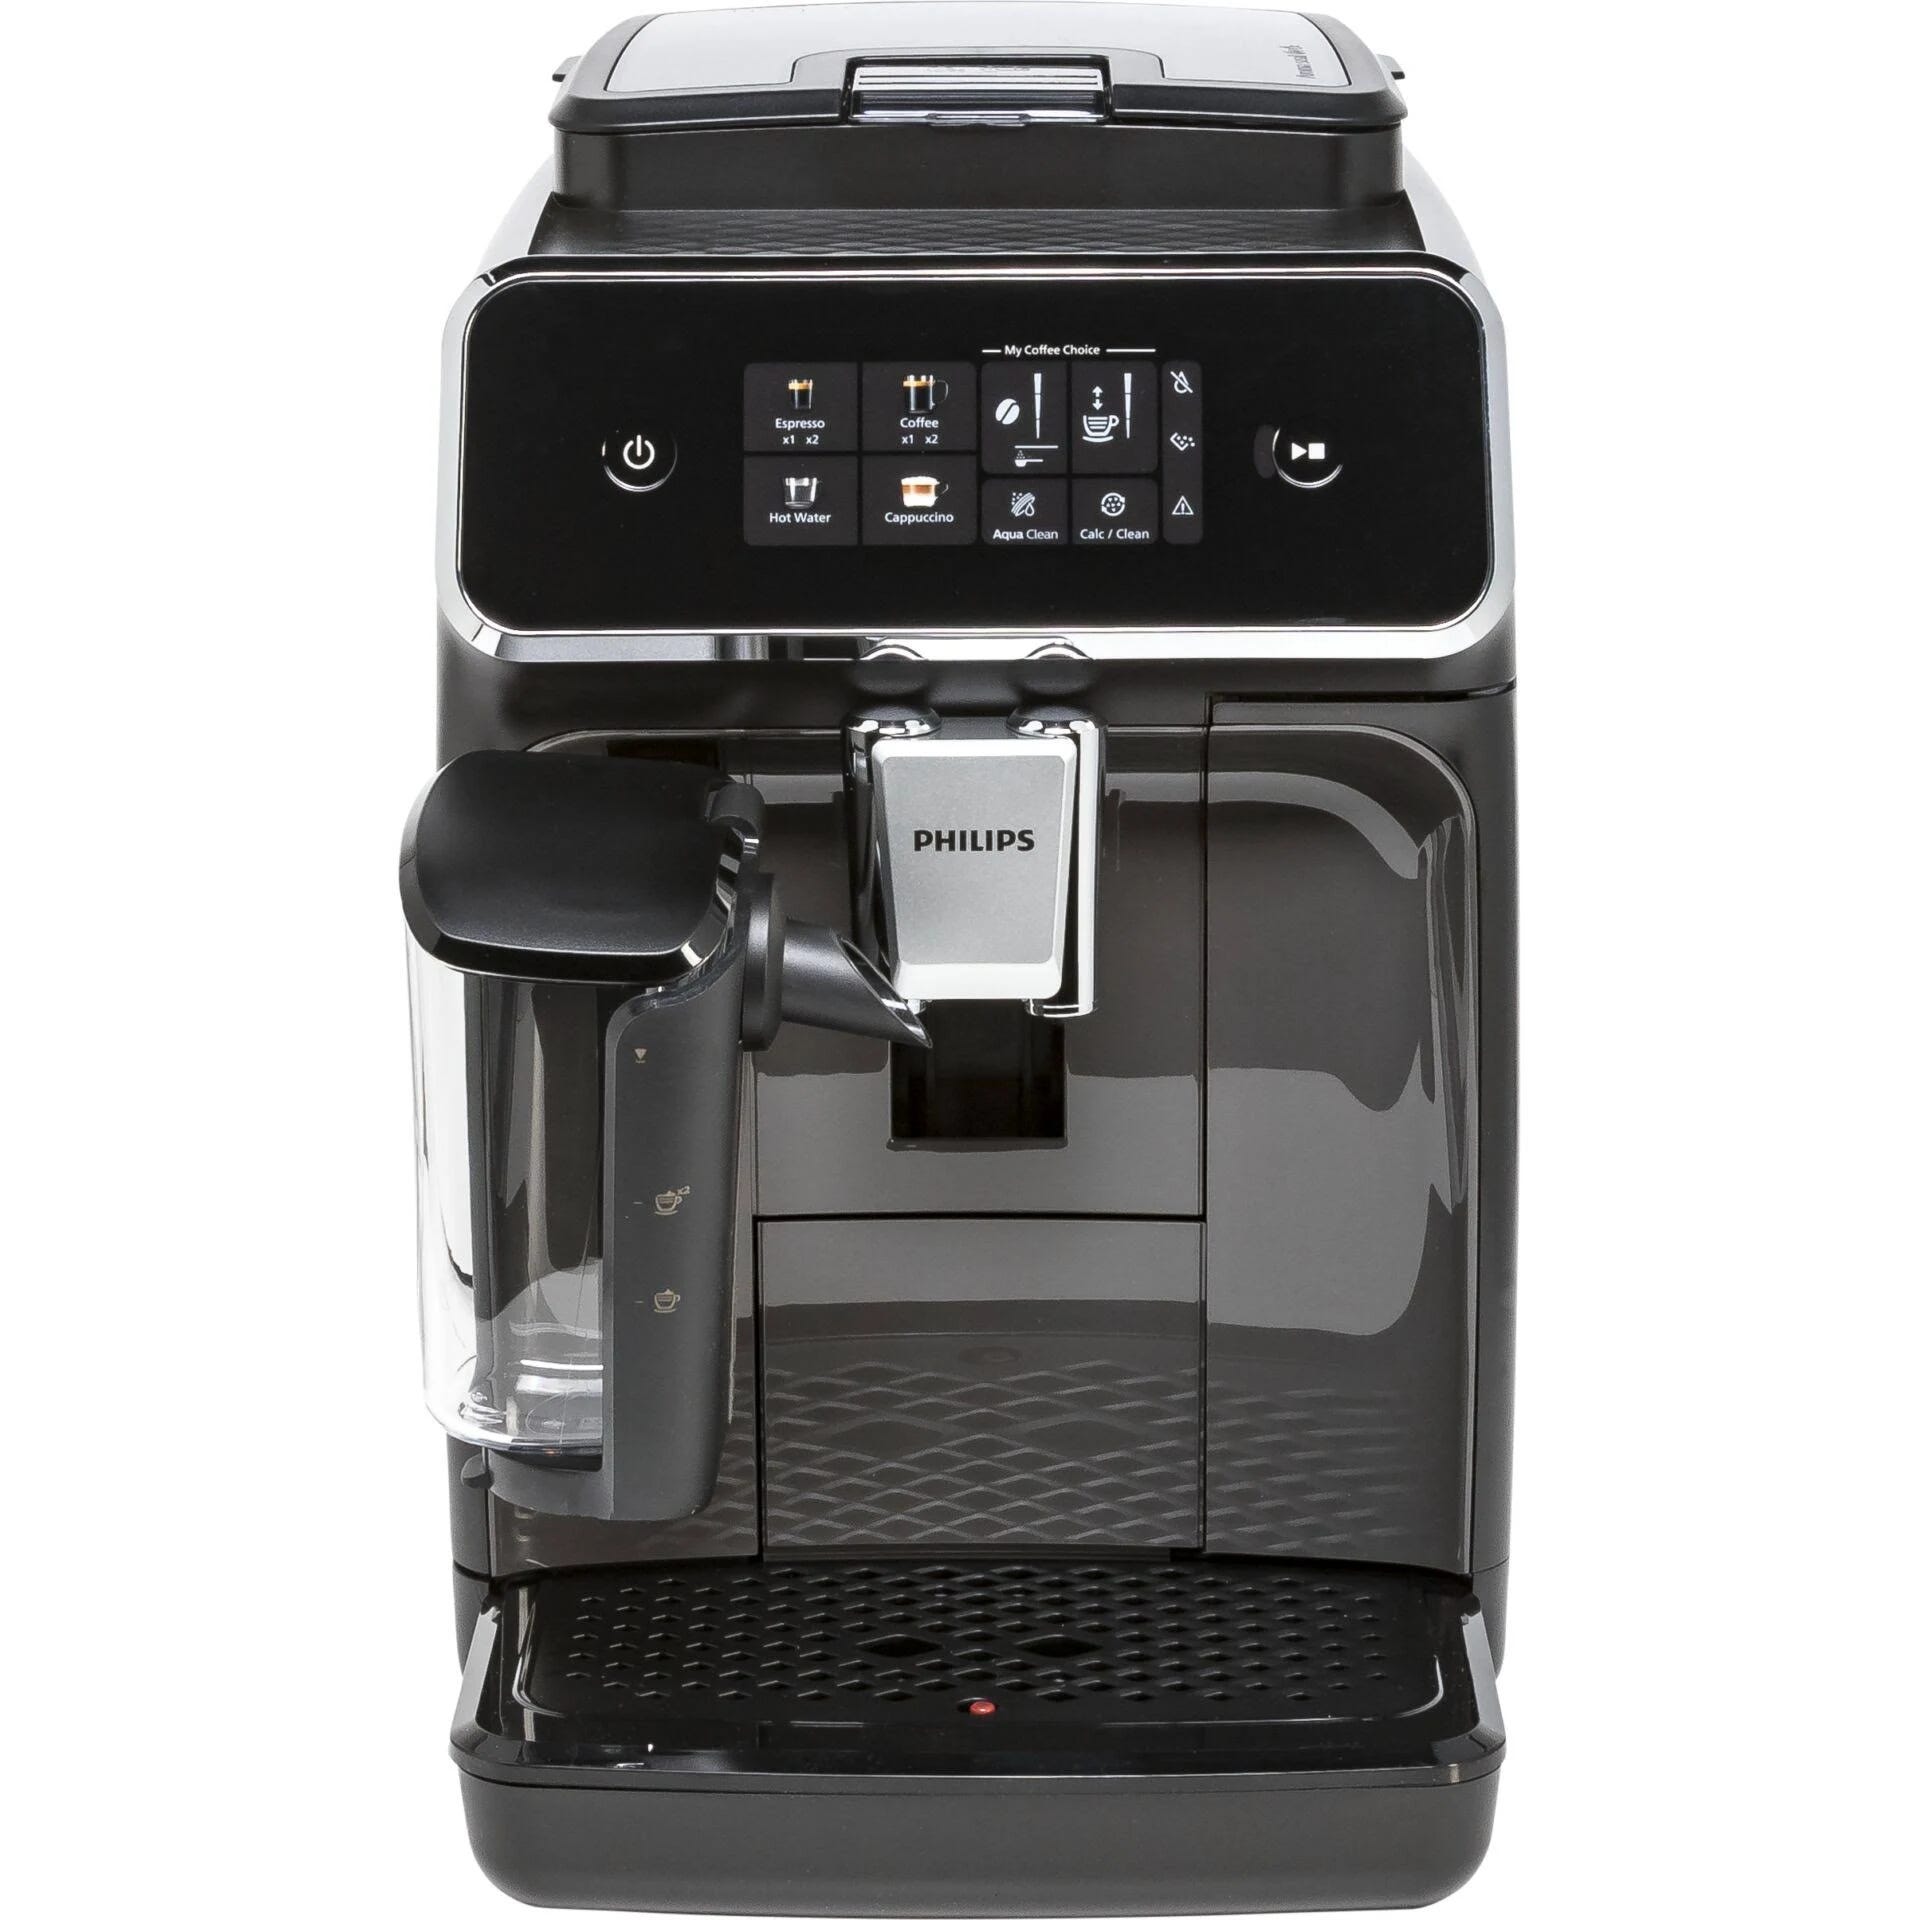 Philips EP2334/10 Fully-automatic Espresso Machine with LatteGo Milk System and SilentBrew Technology | Image